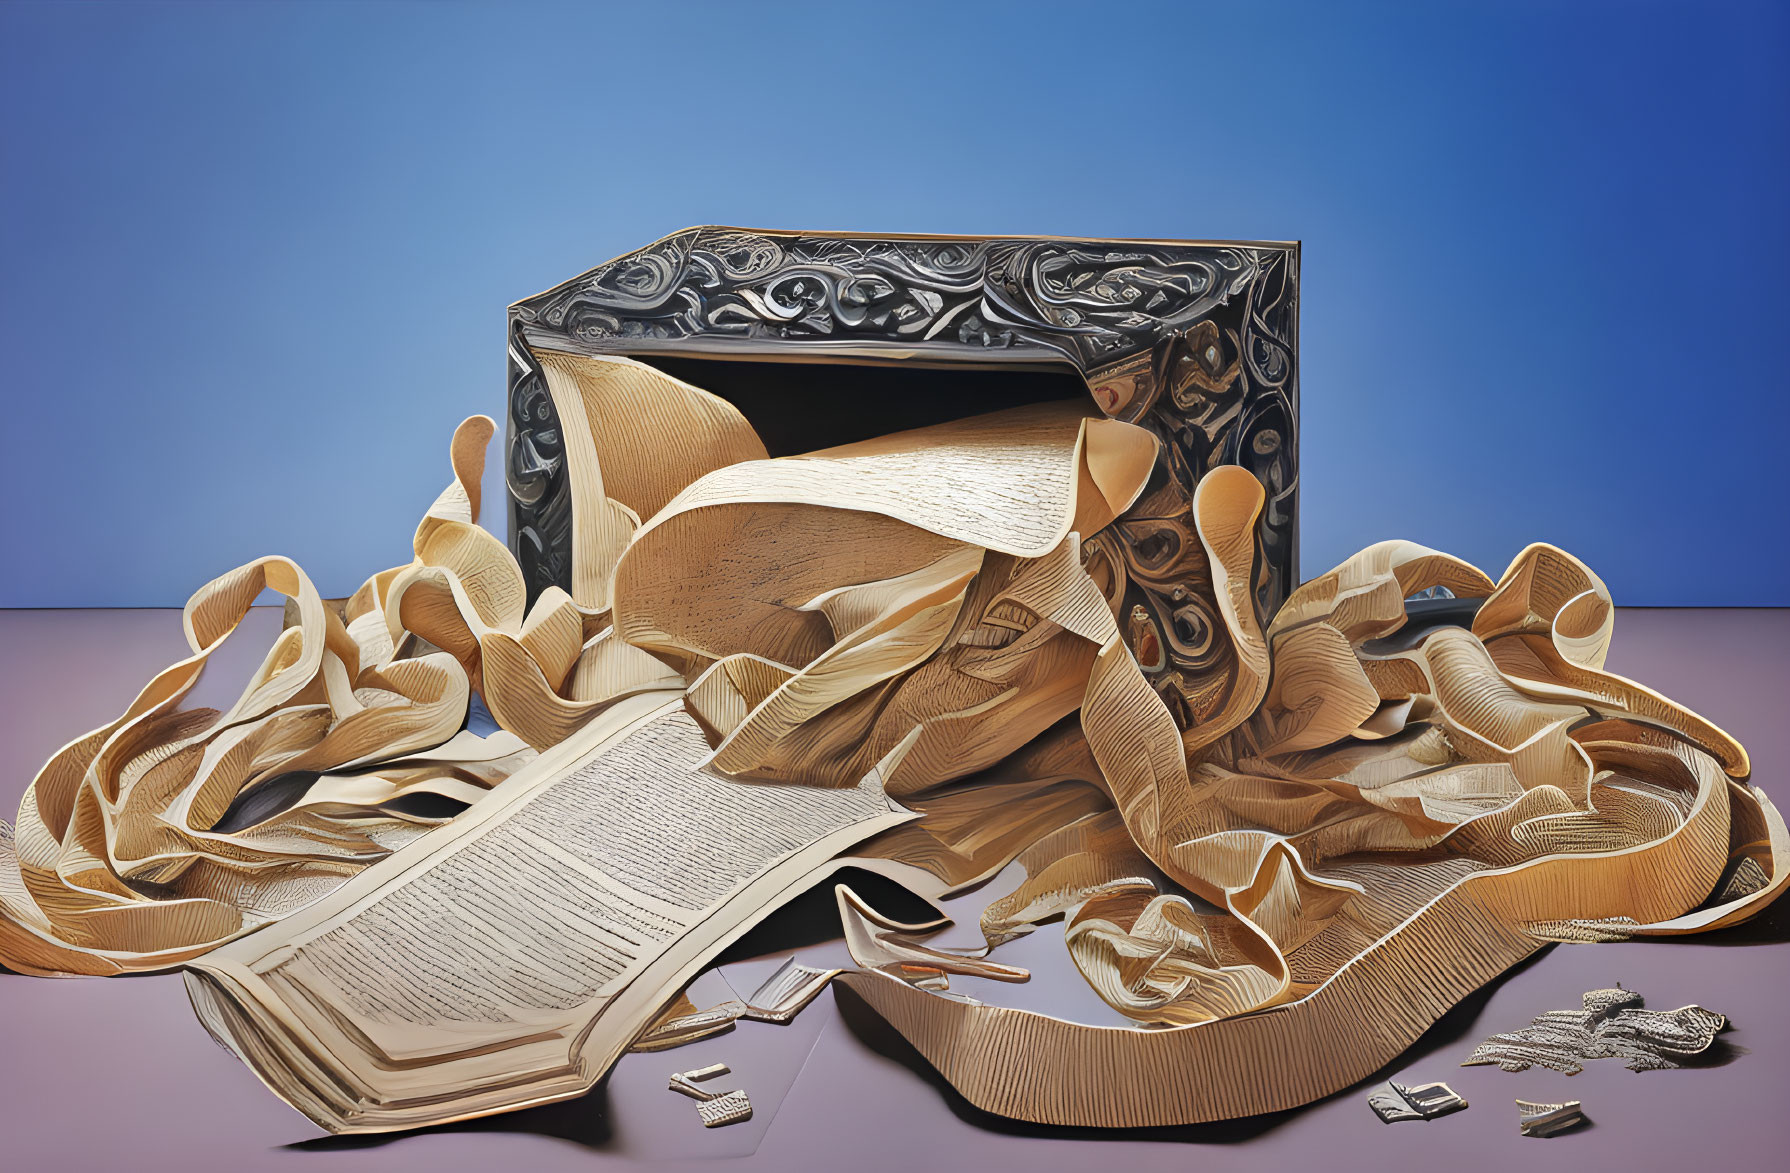 Ornate box spilling ribbon-like paper and shredded book pieces on blue gradient background